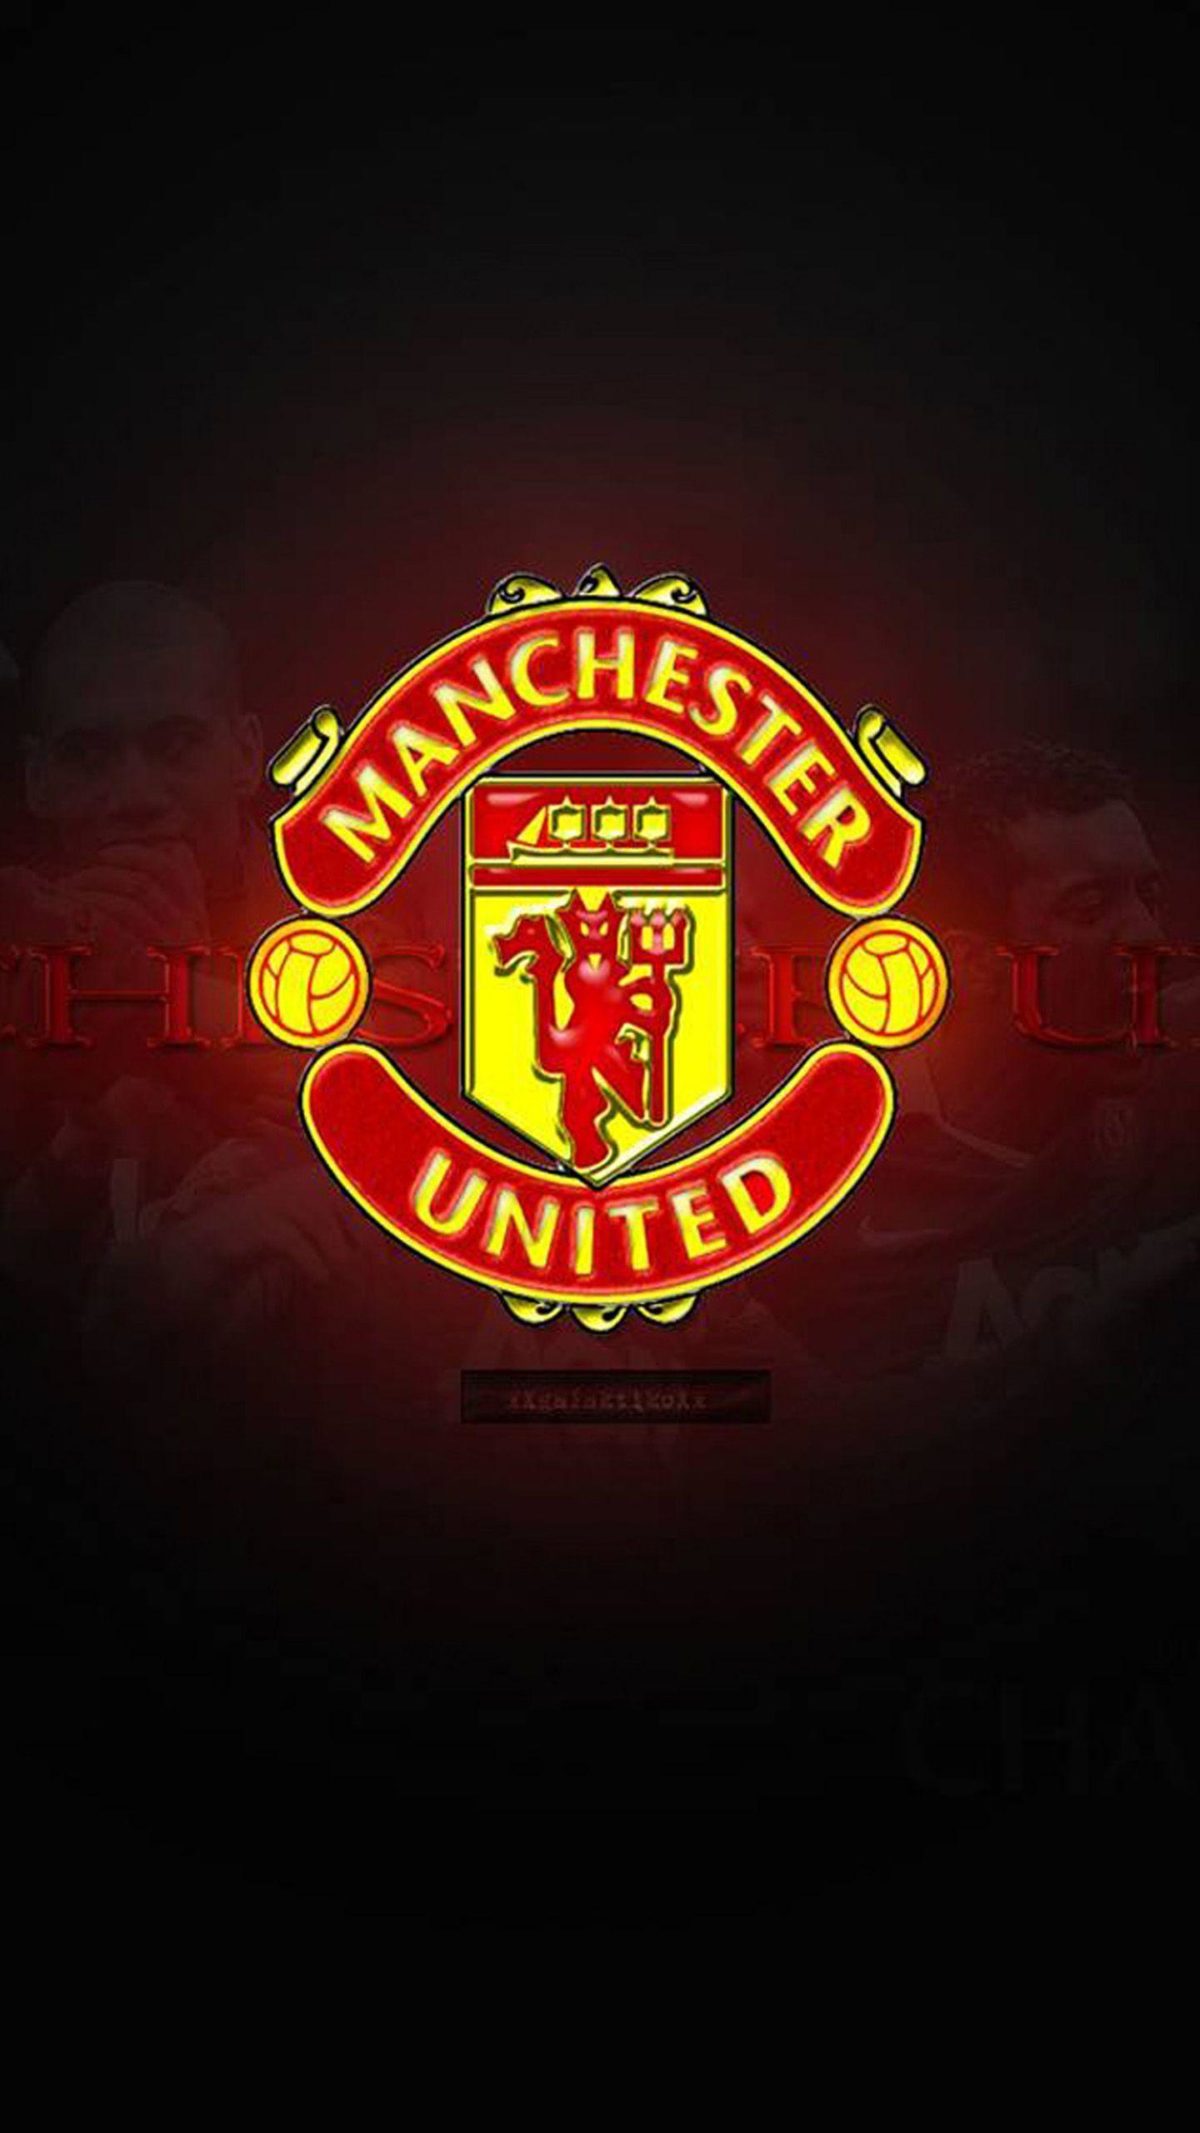 Manchester United 1 wallpapers for galaxy S6.jpg